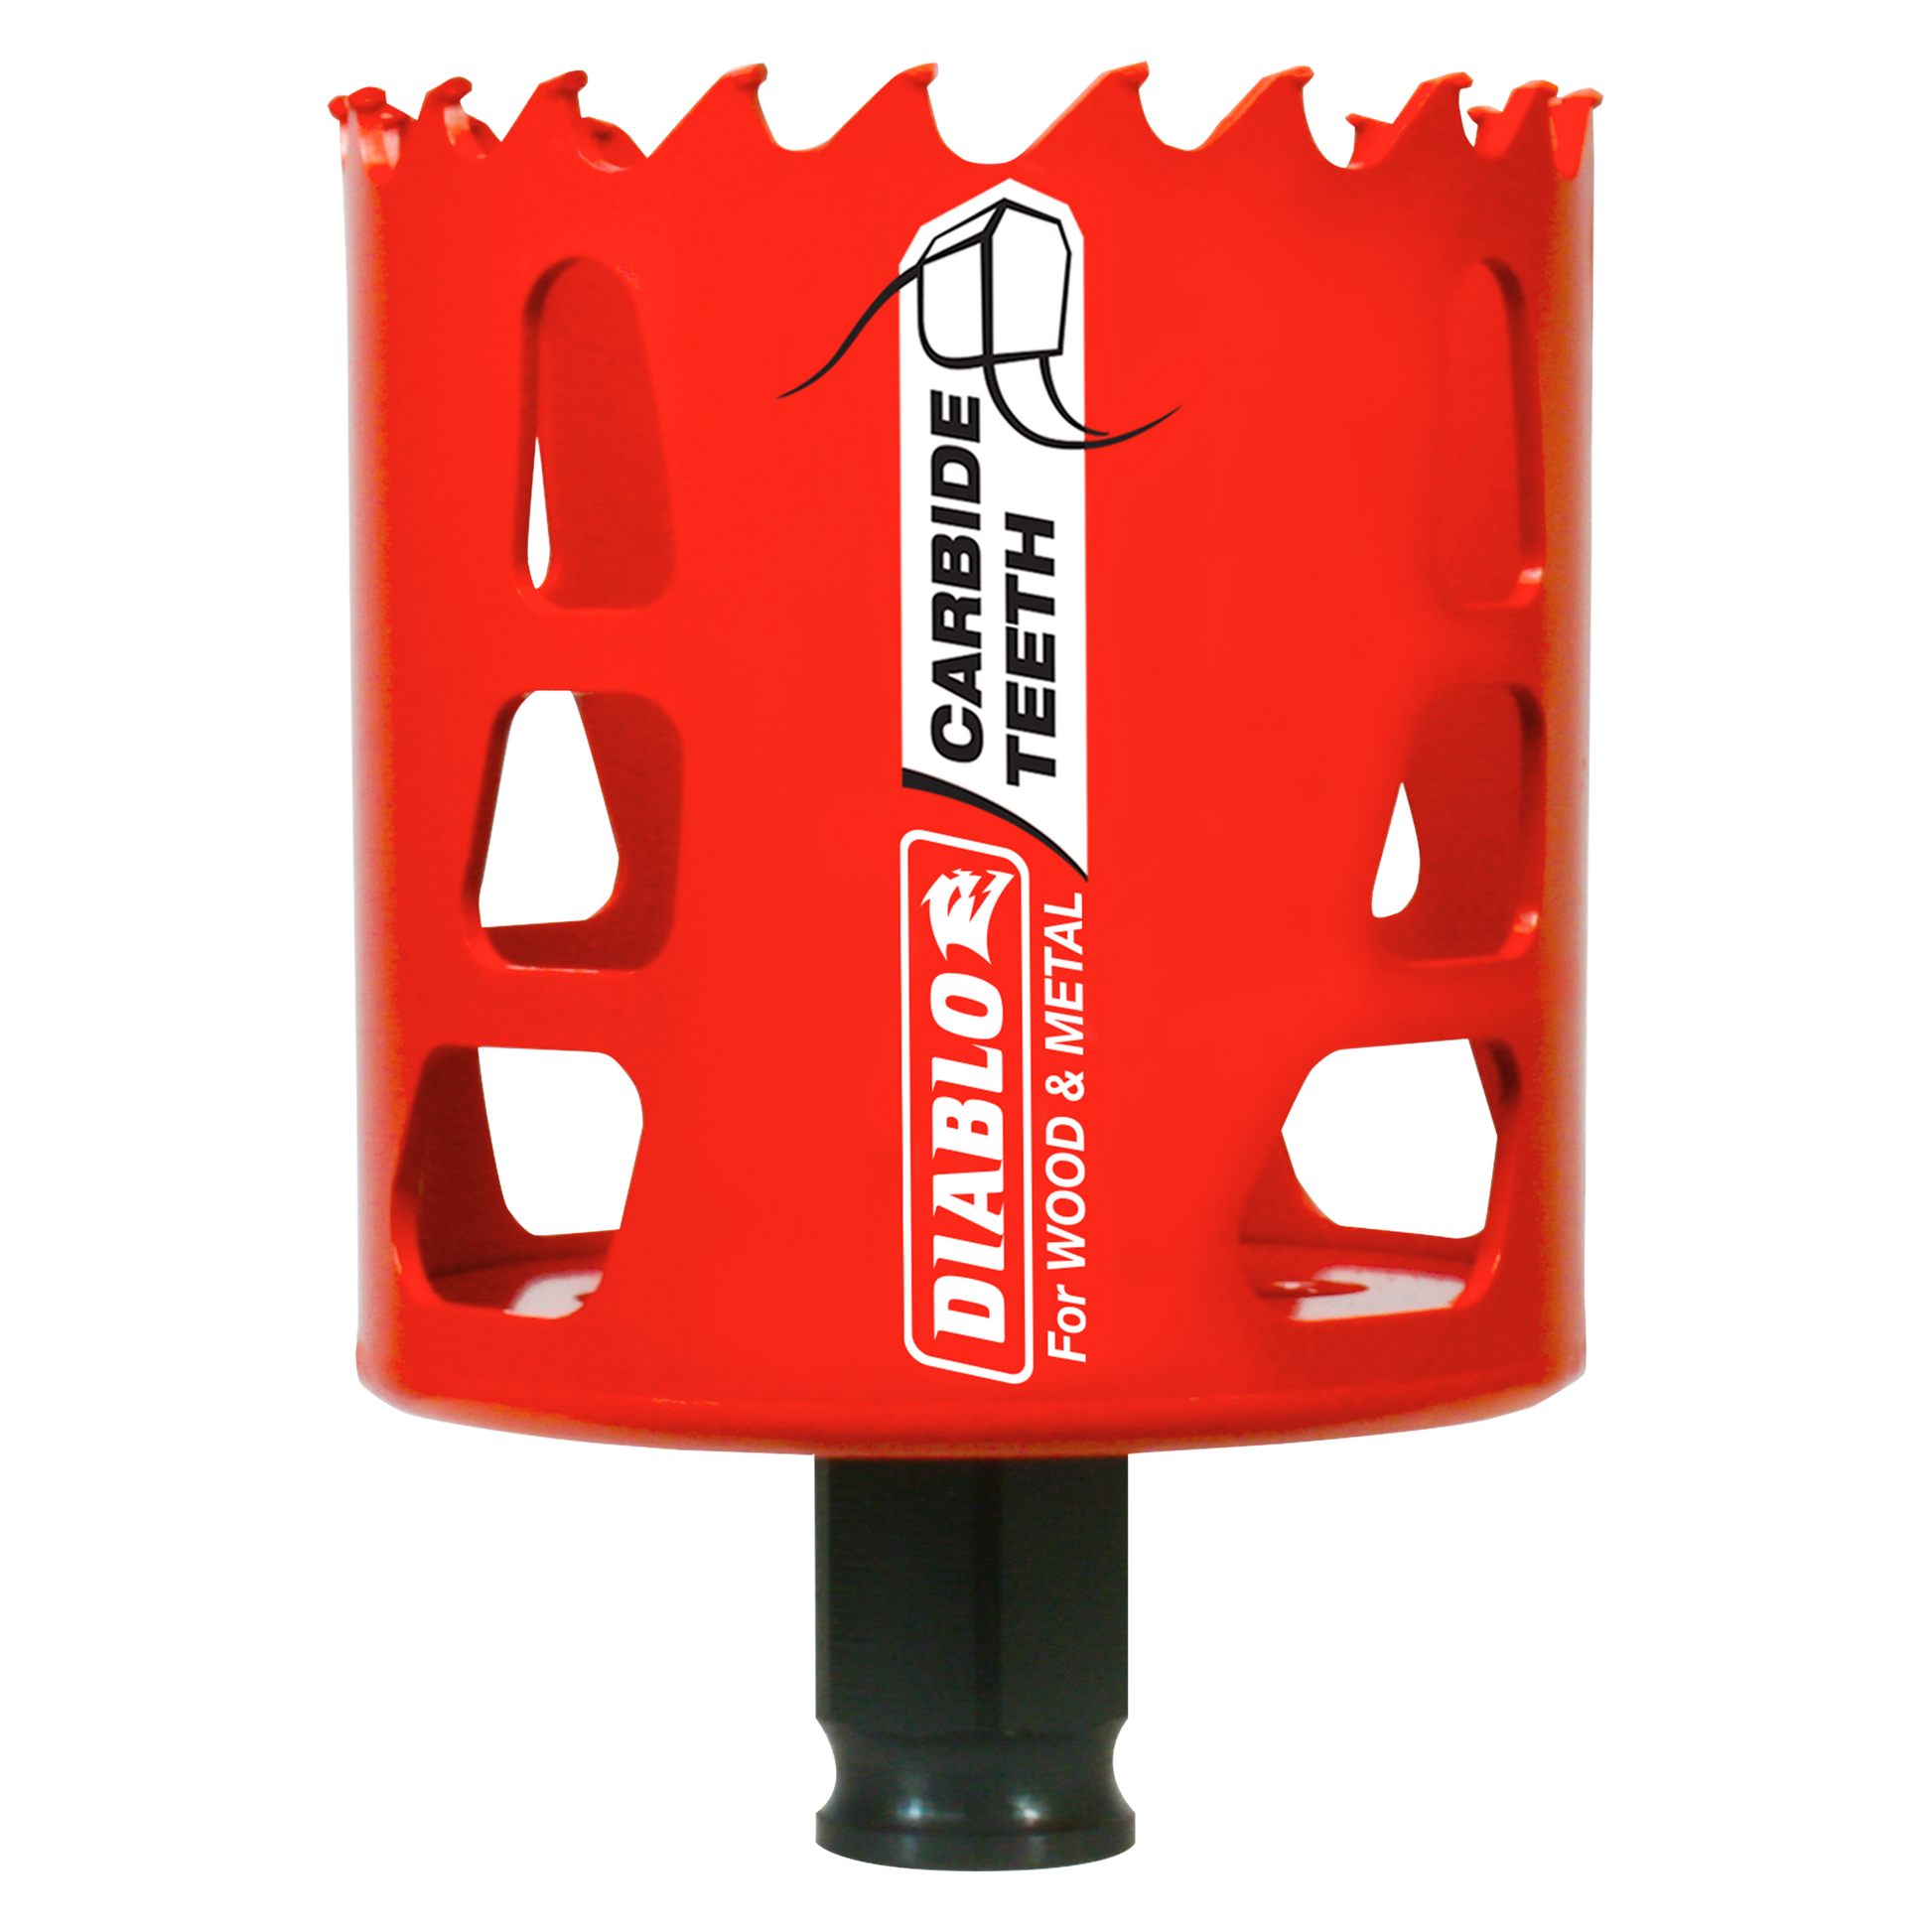 2-9/16 in. (65mm) Carbide-Tipped Wood & Metal Holesaw